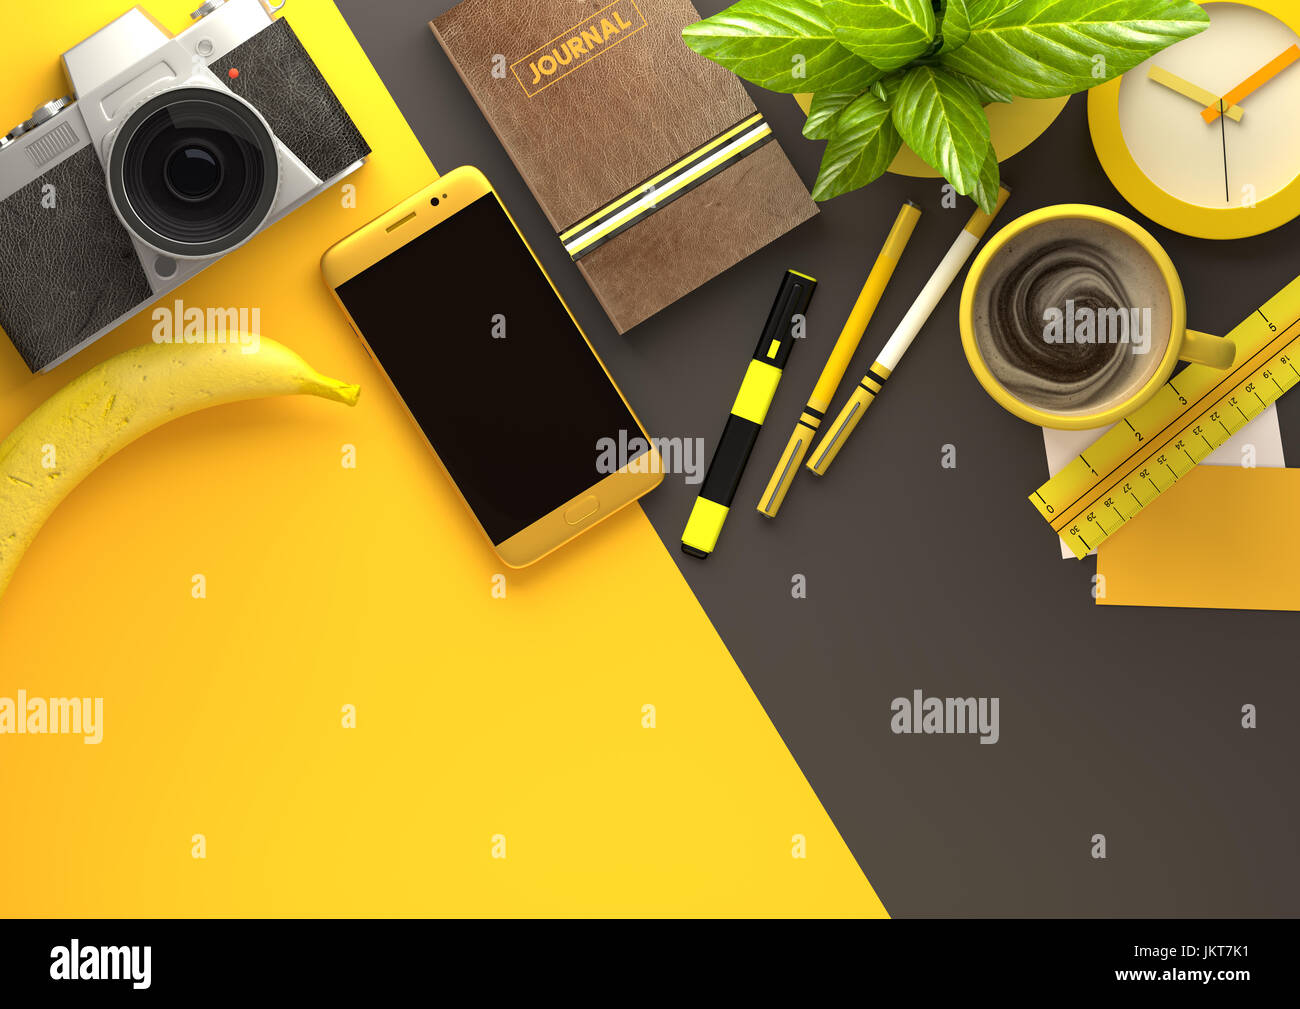 Yellow themed Top down view of a business desktop with a smartphone, office accessories,a journal, coffee and snacks. 3D illustration render. Stock Photo